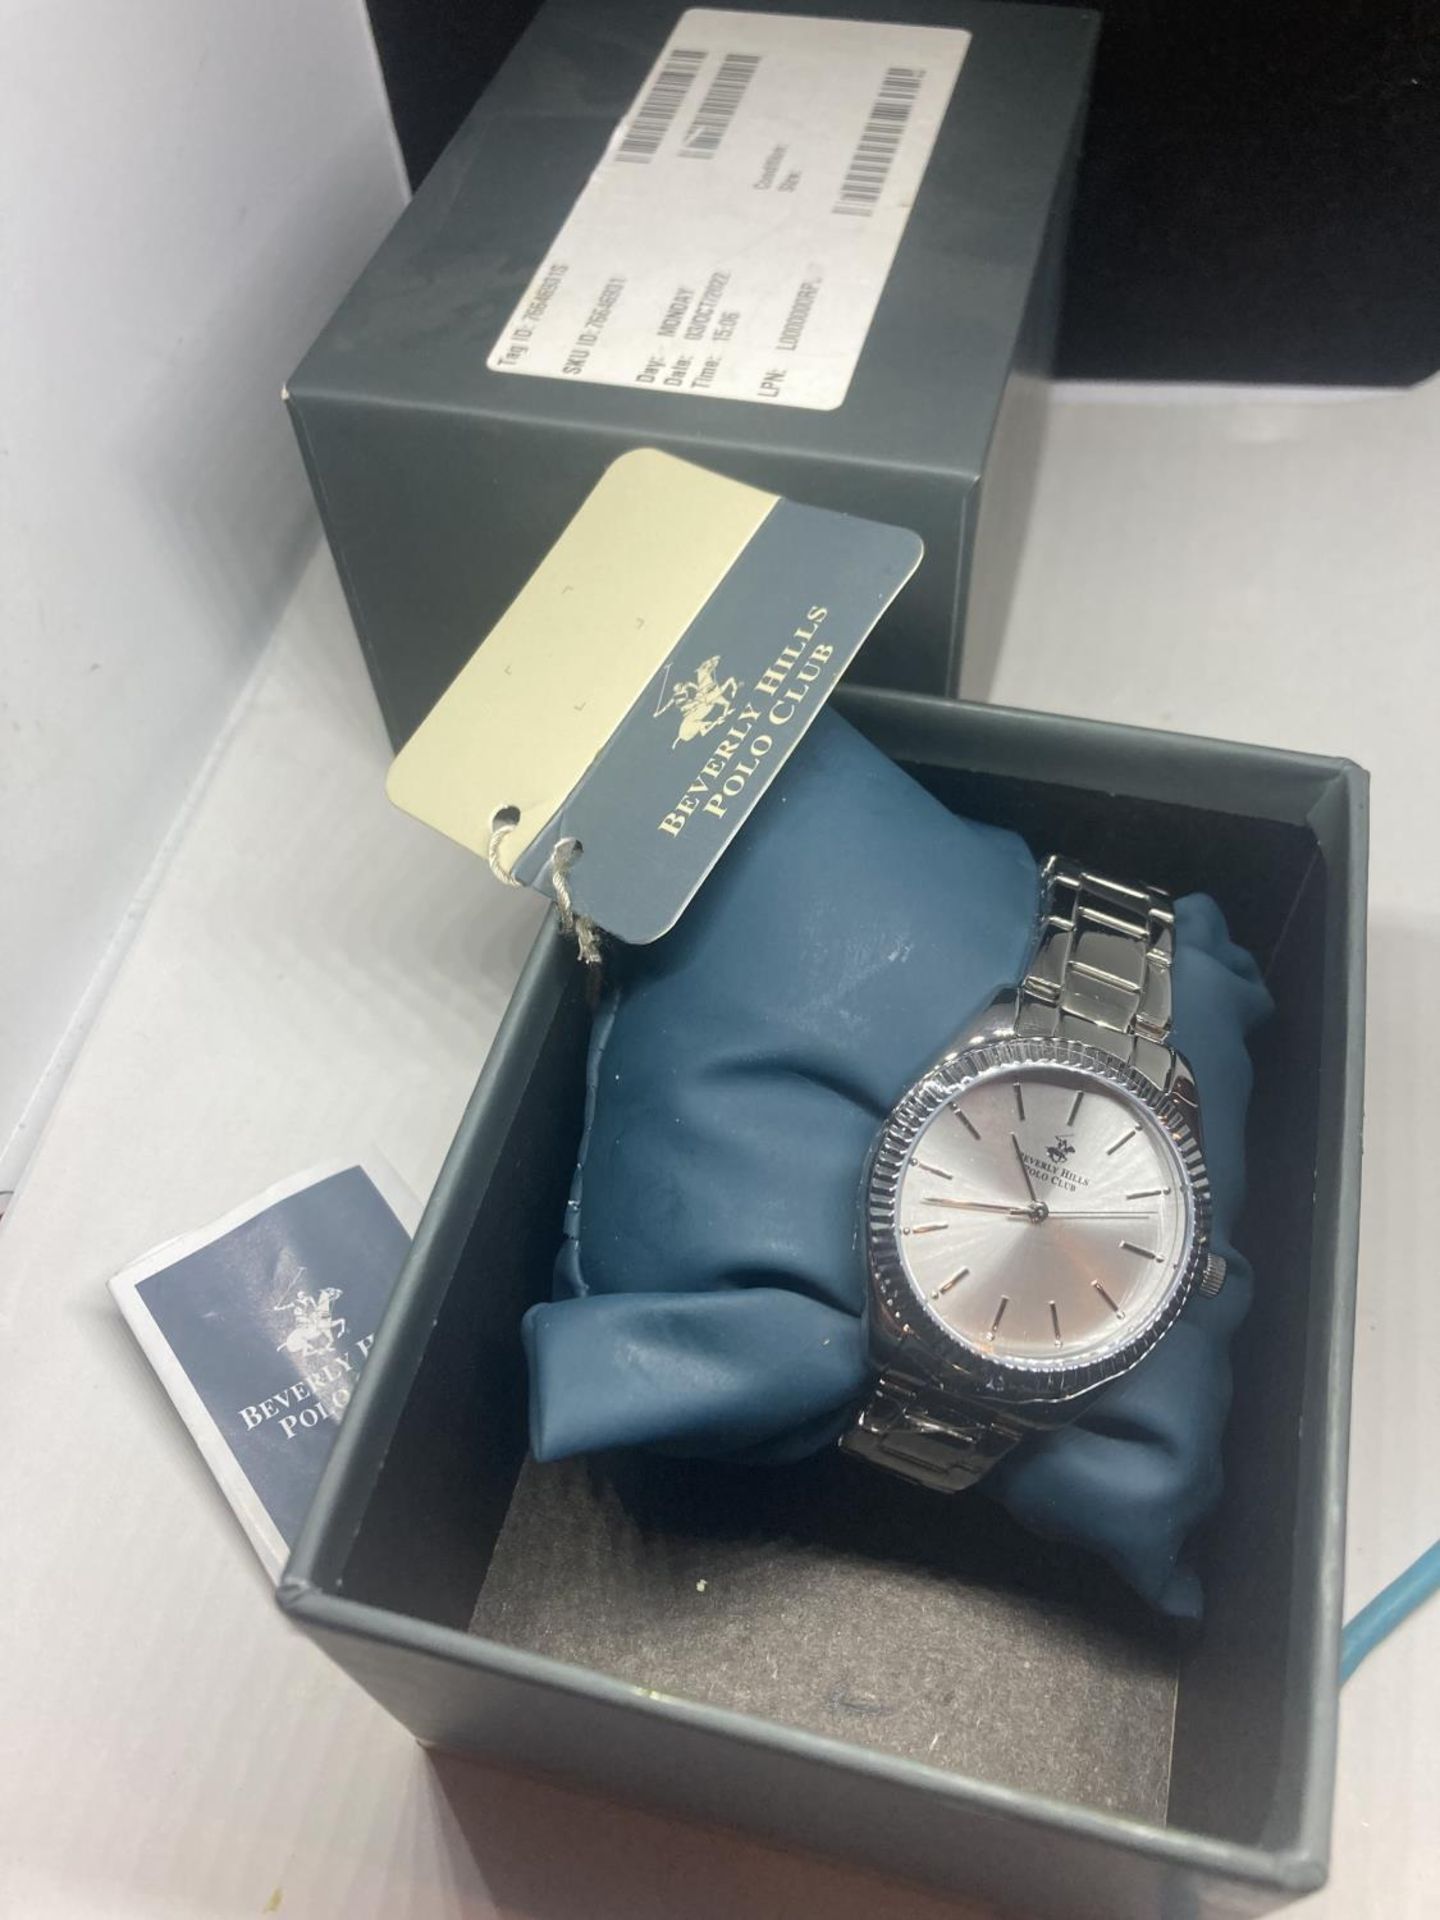 AN AS NEW AND BOXED BEVERLEY HILLS POLO CLUB WRIST WATCH SEEN WORKING BUT NO WARRANTY - Image 2 of 10